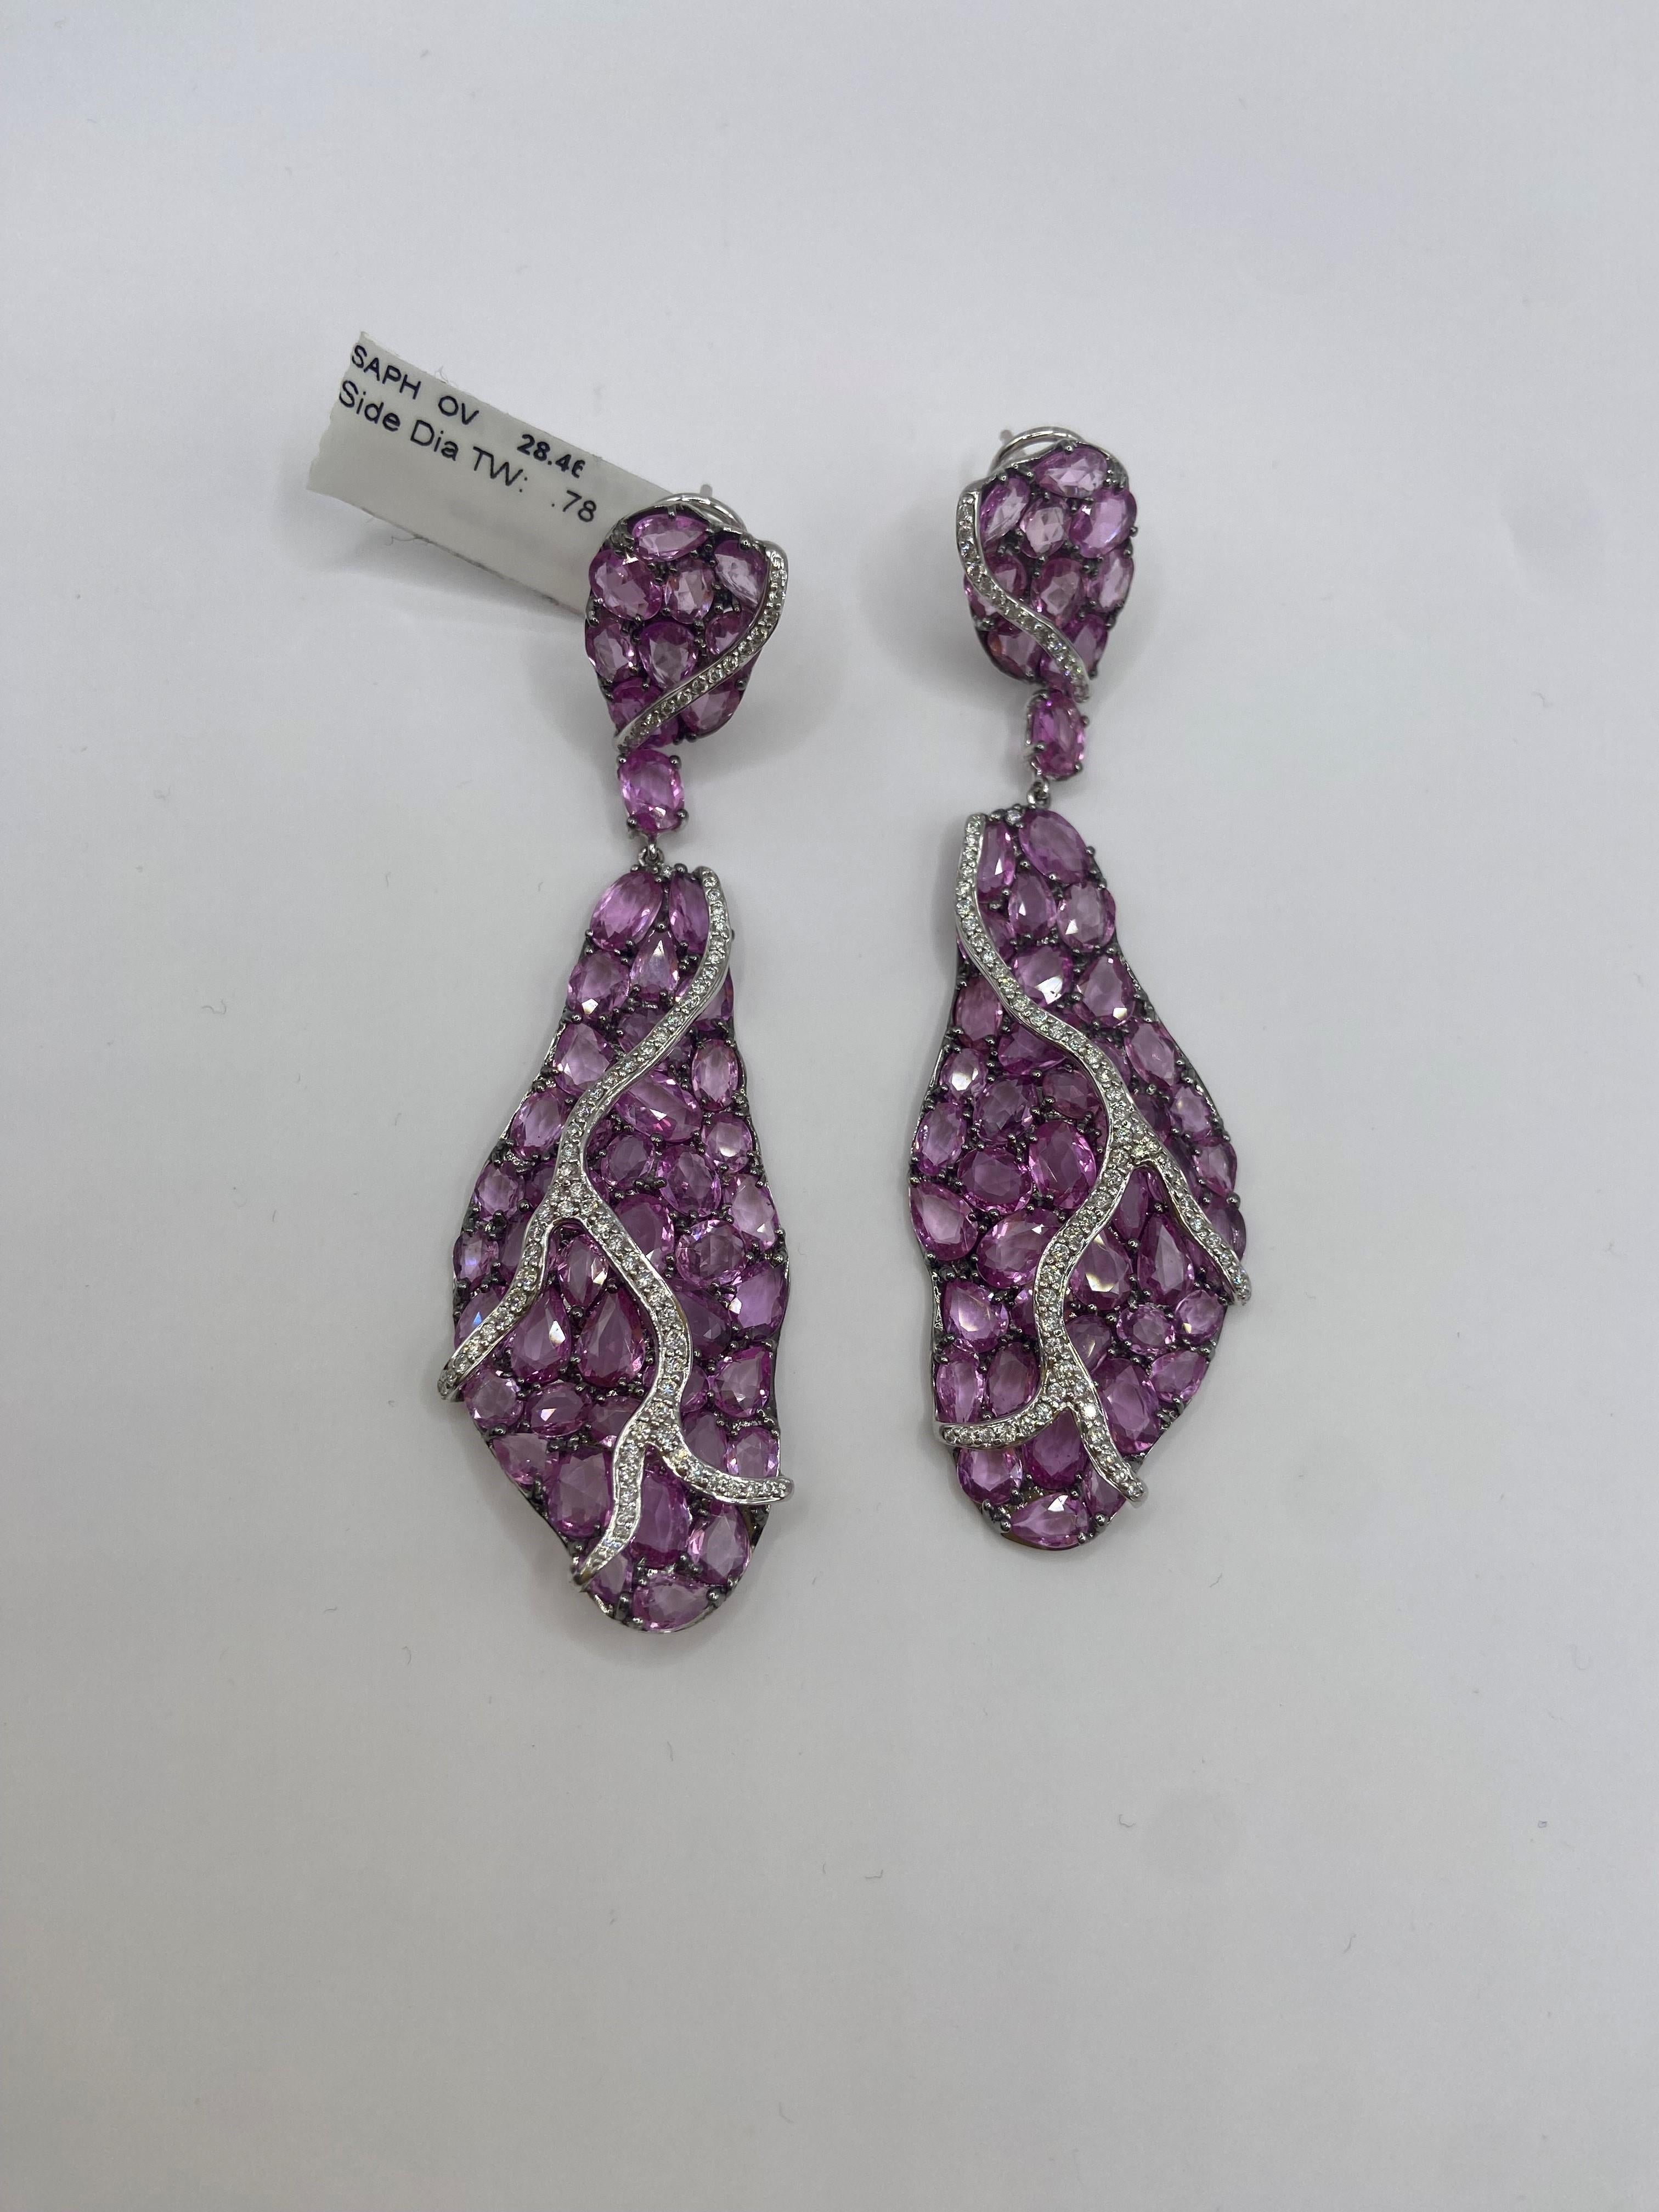 •	18KT White Gold
•	29.24 Carats

•	146 Round Diamonds: 0.78ctw
•	Color: F
•	Clarity SI1

•	Number of Rose Cut Pink Sapphires: 100
•	Carat Weight: 28.46ctw

This pair of earrings is made with 100 rose cut light pink sapphires, weighing 28.46 carats.